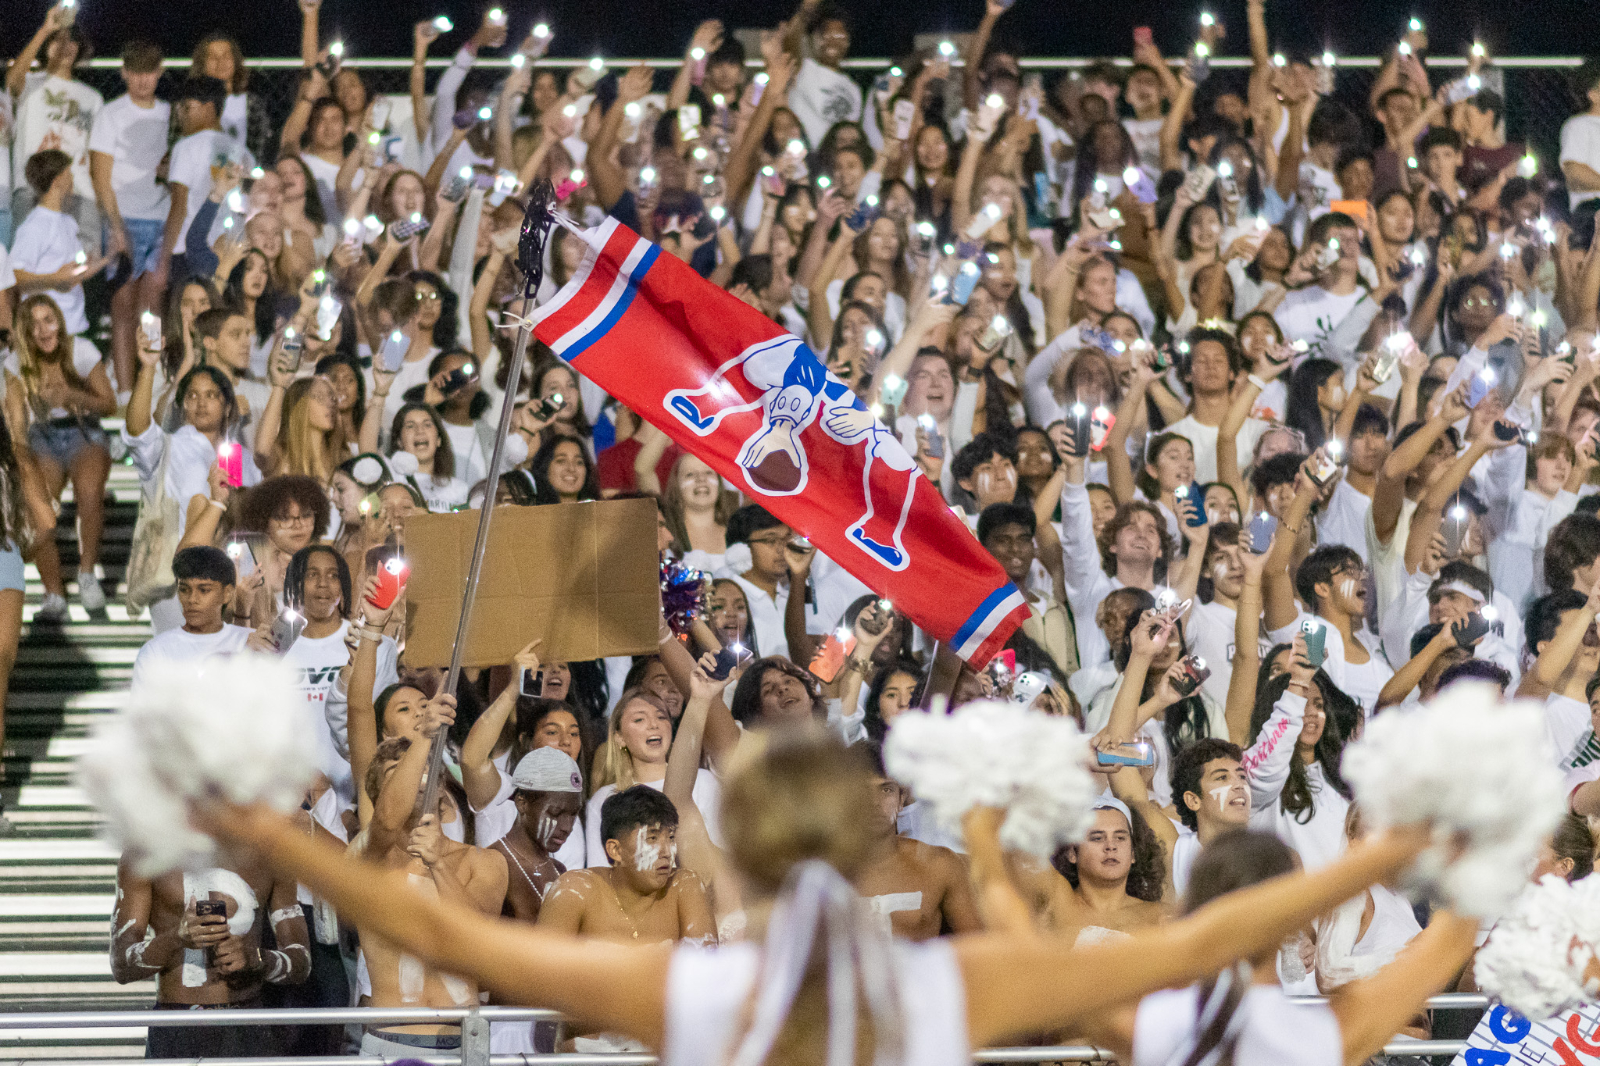 Students support the football team in a Thursday night matchup against Churchill on Sept. 14. Even if they take place on Thursdays, football games can still be well-attended and energetic, bringing together the student body.